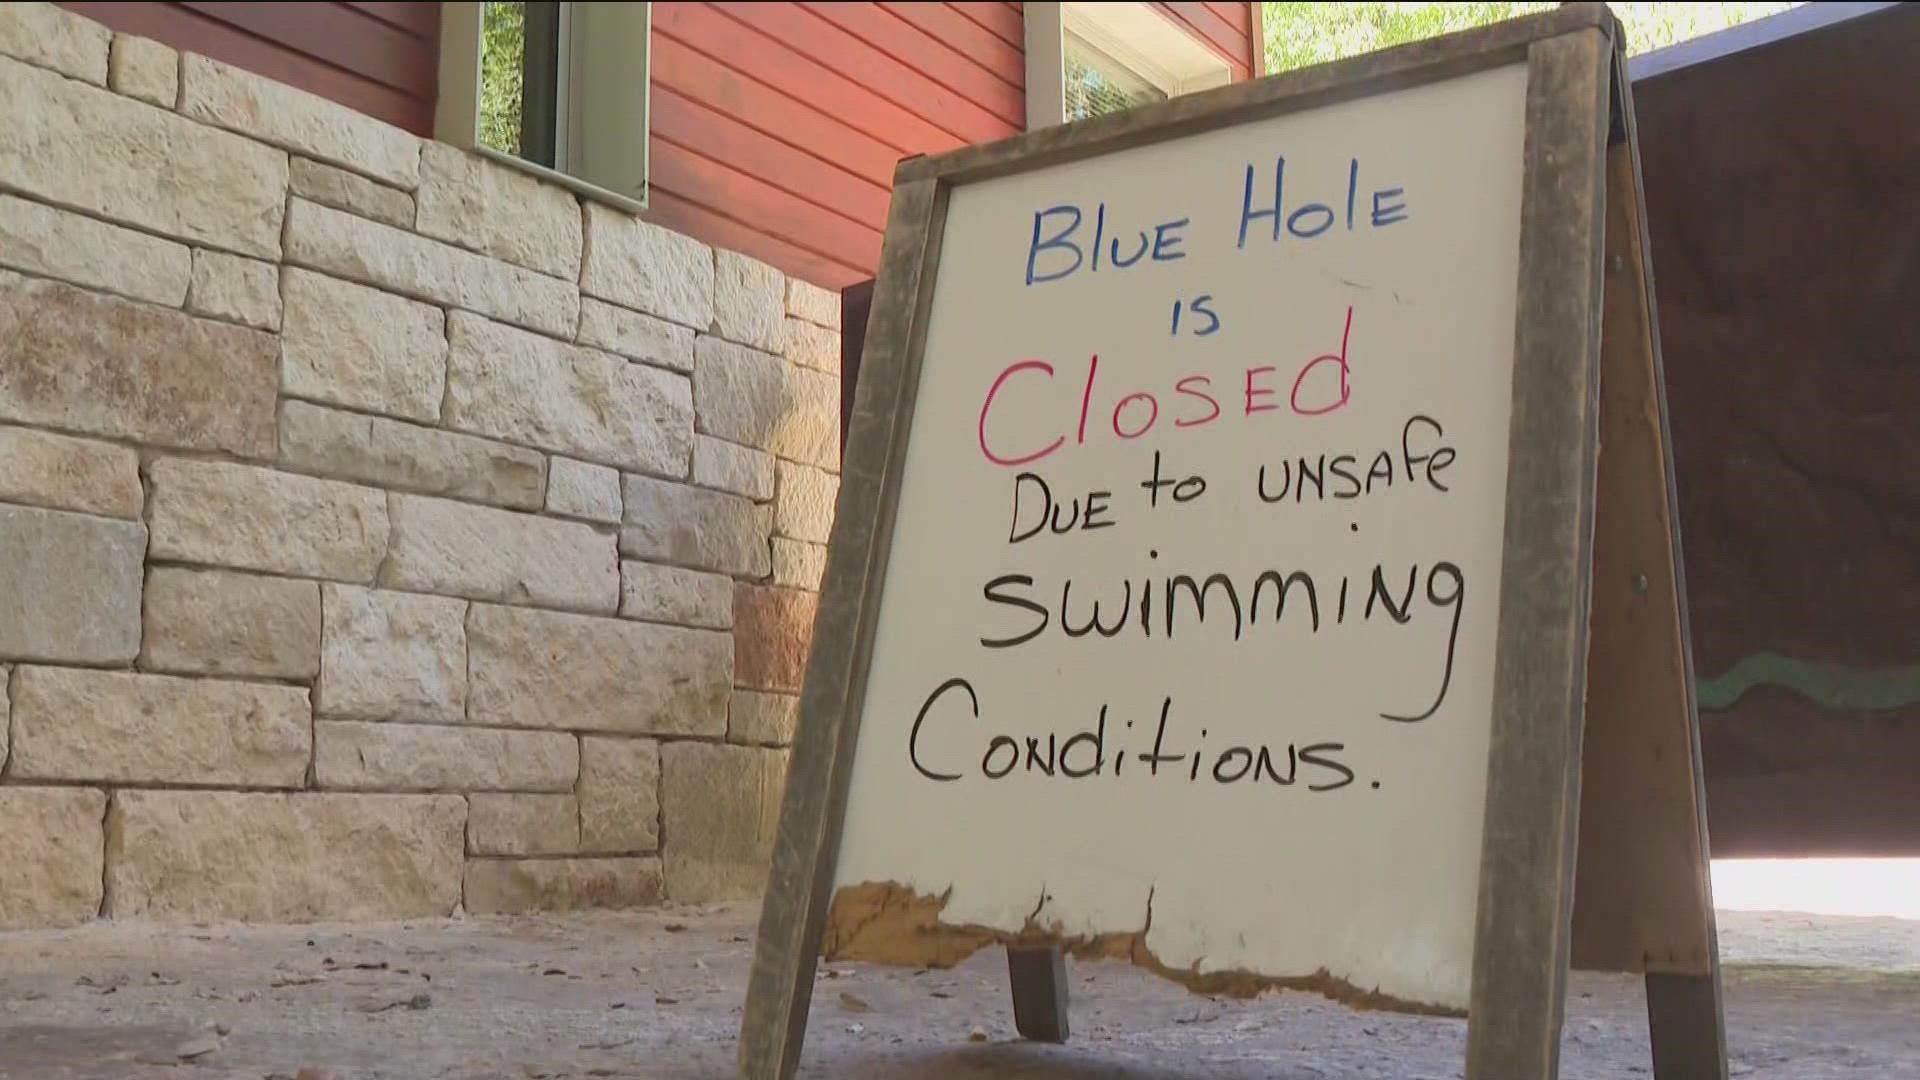 Two popular swimming attractions in Hays County are now closed for swimming – both Jacob's Well and now Blue Hole.